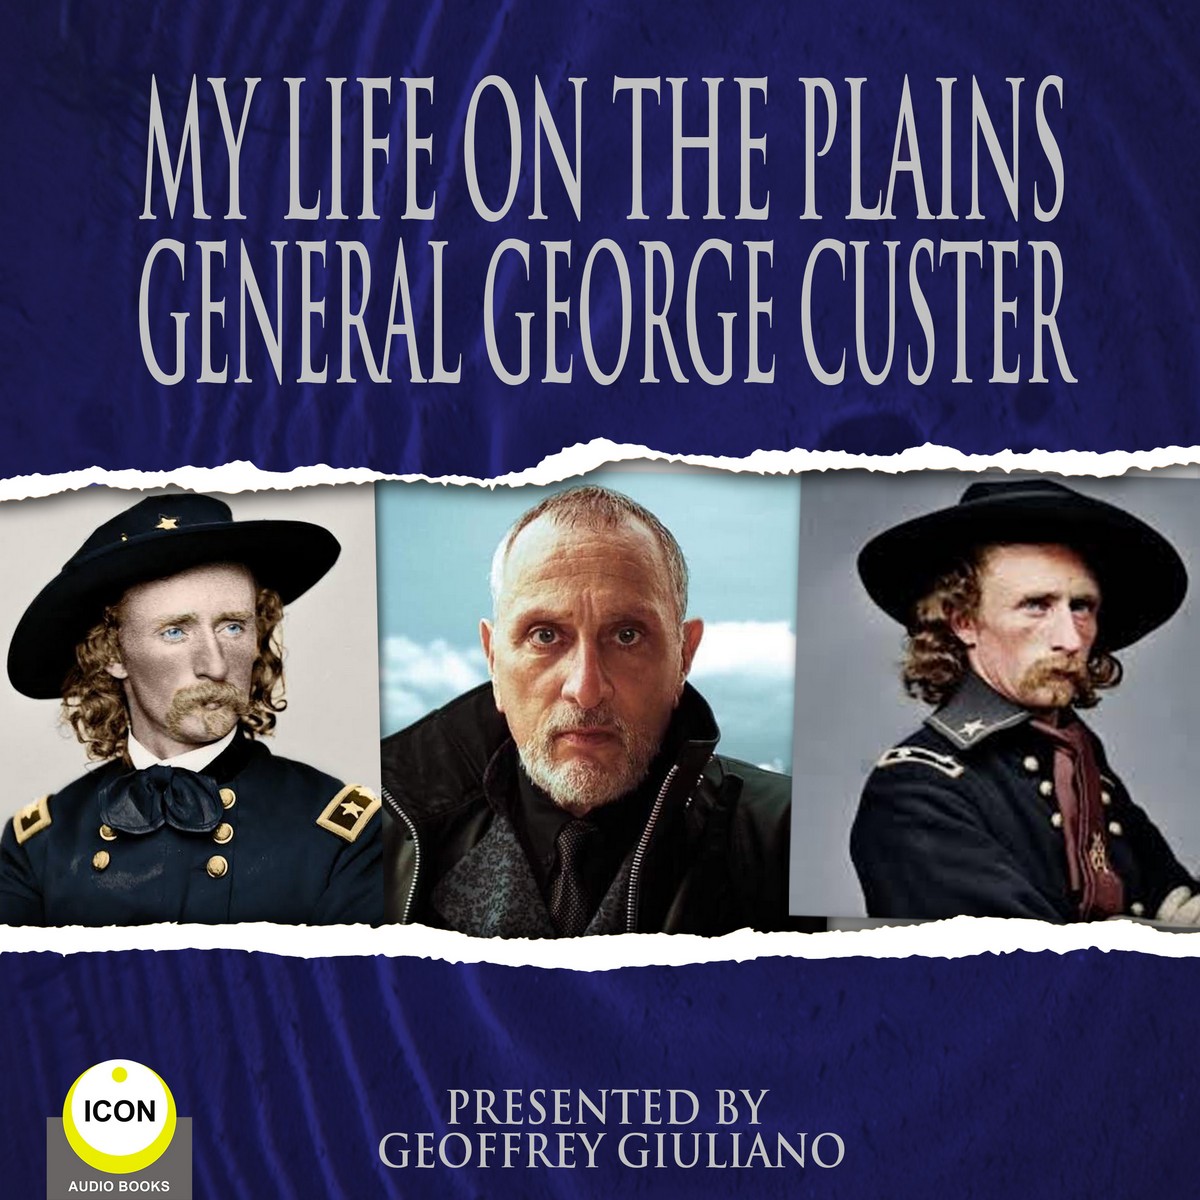 My Life On The Plains General George Custer